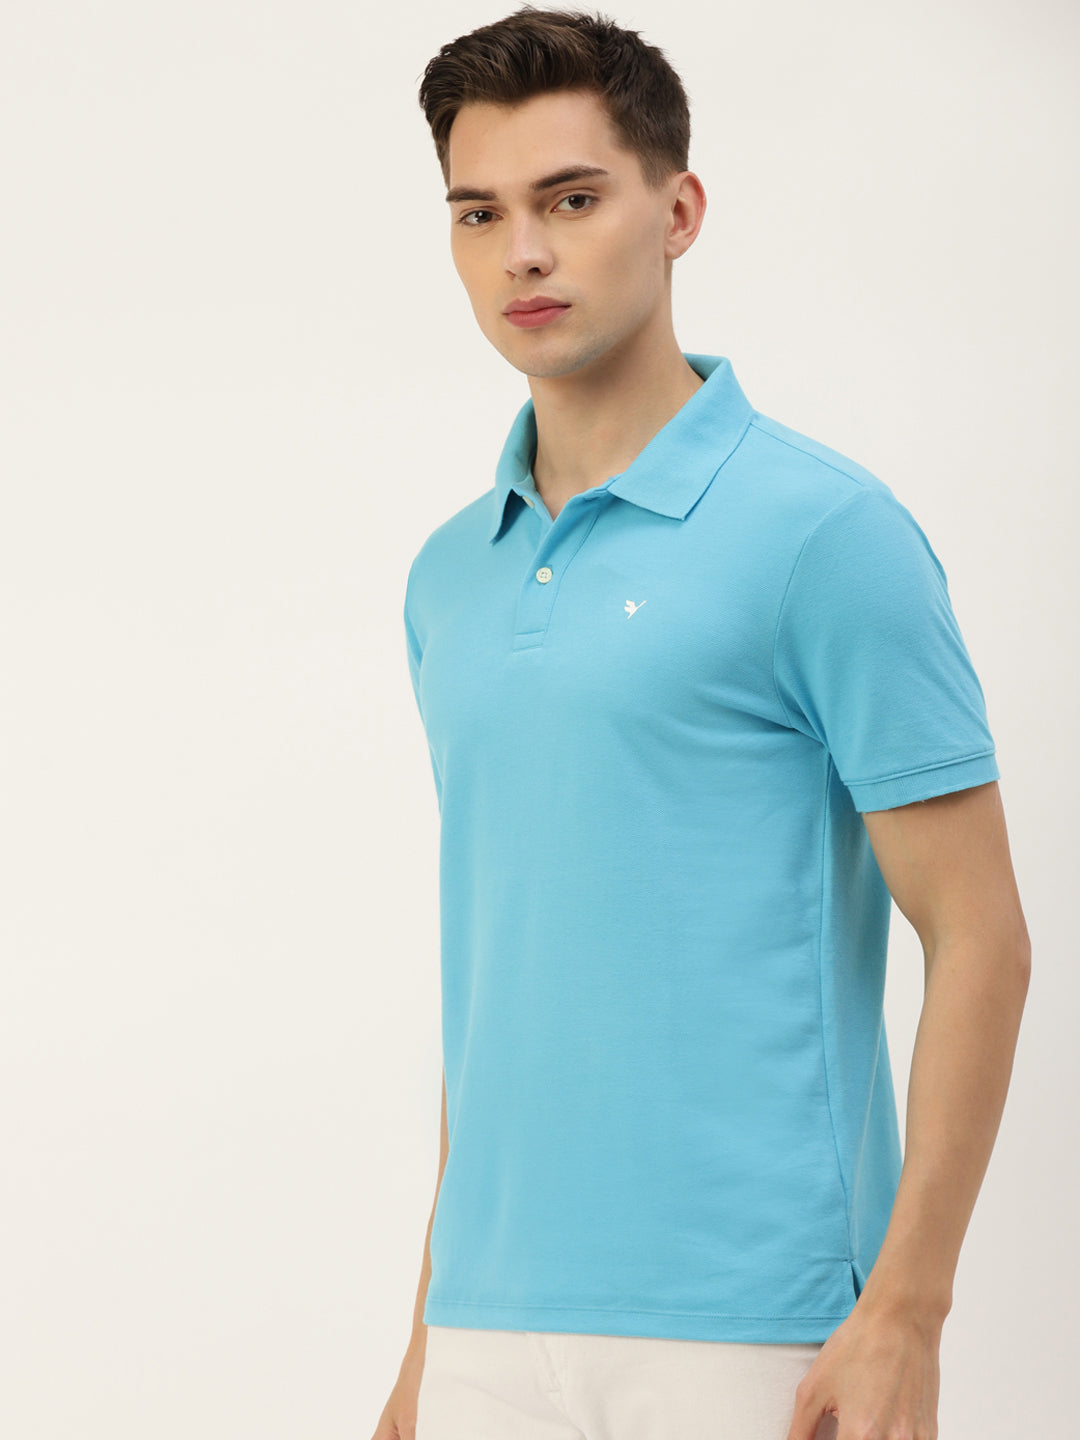 MENS PREMIUM COTTON OVER DYED HALF SLEEVE COLLAR T-SHIRTS